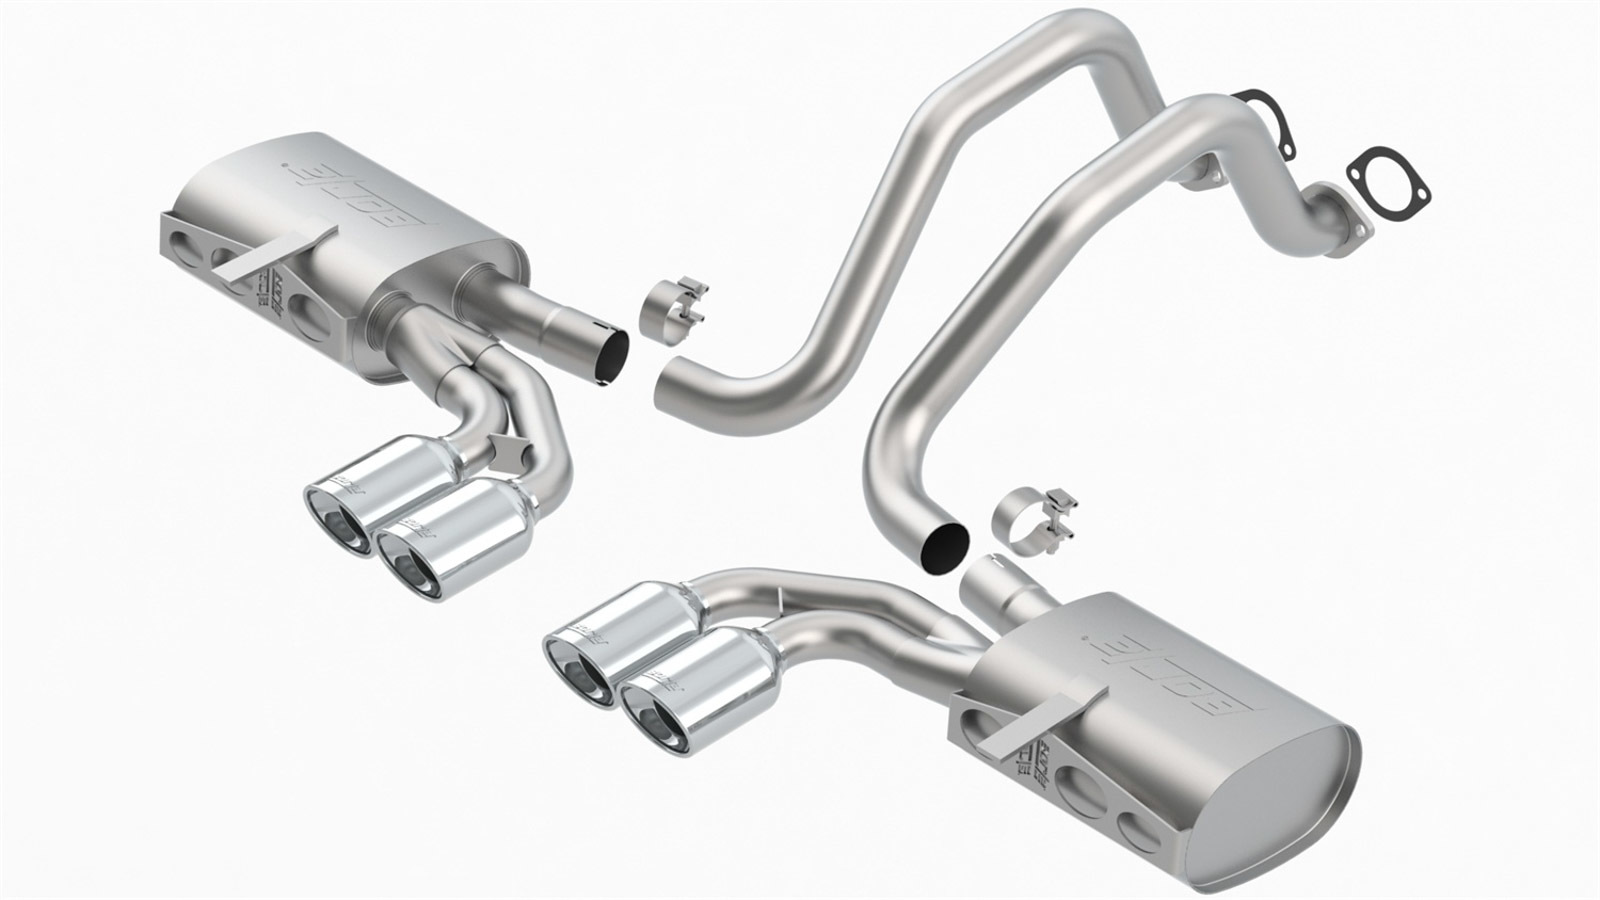 Borla Exhaust System, S-Type, Cat-Back, 2-1/2" Intermediate Pipe, 2" Tailpipe, Dual/Dual Tips, Stainless, Natural, C